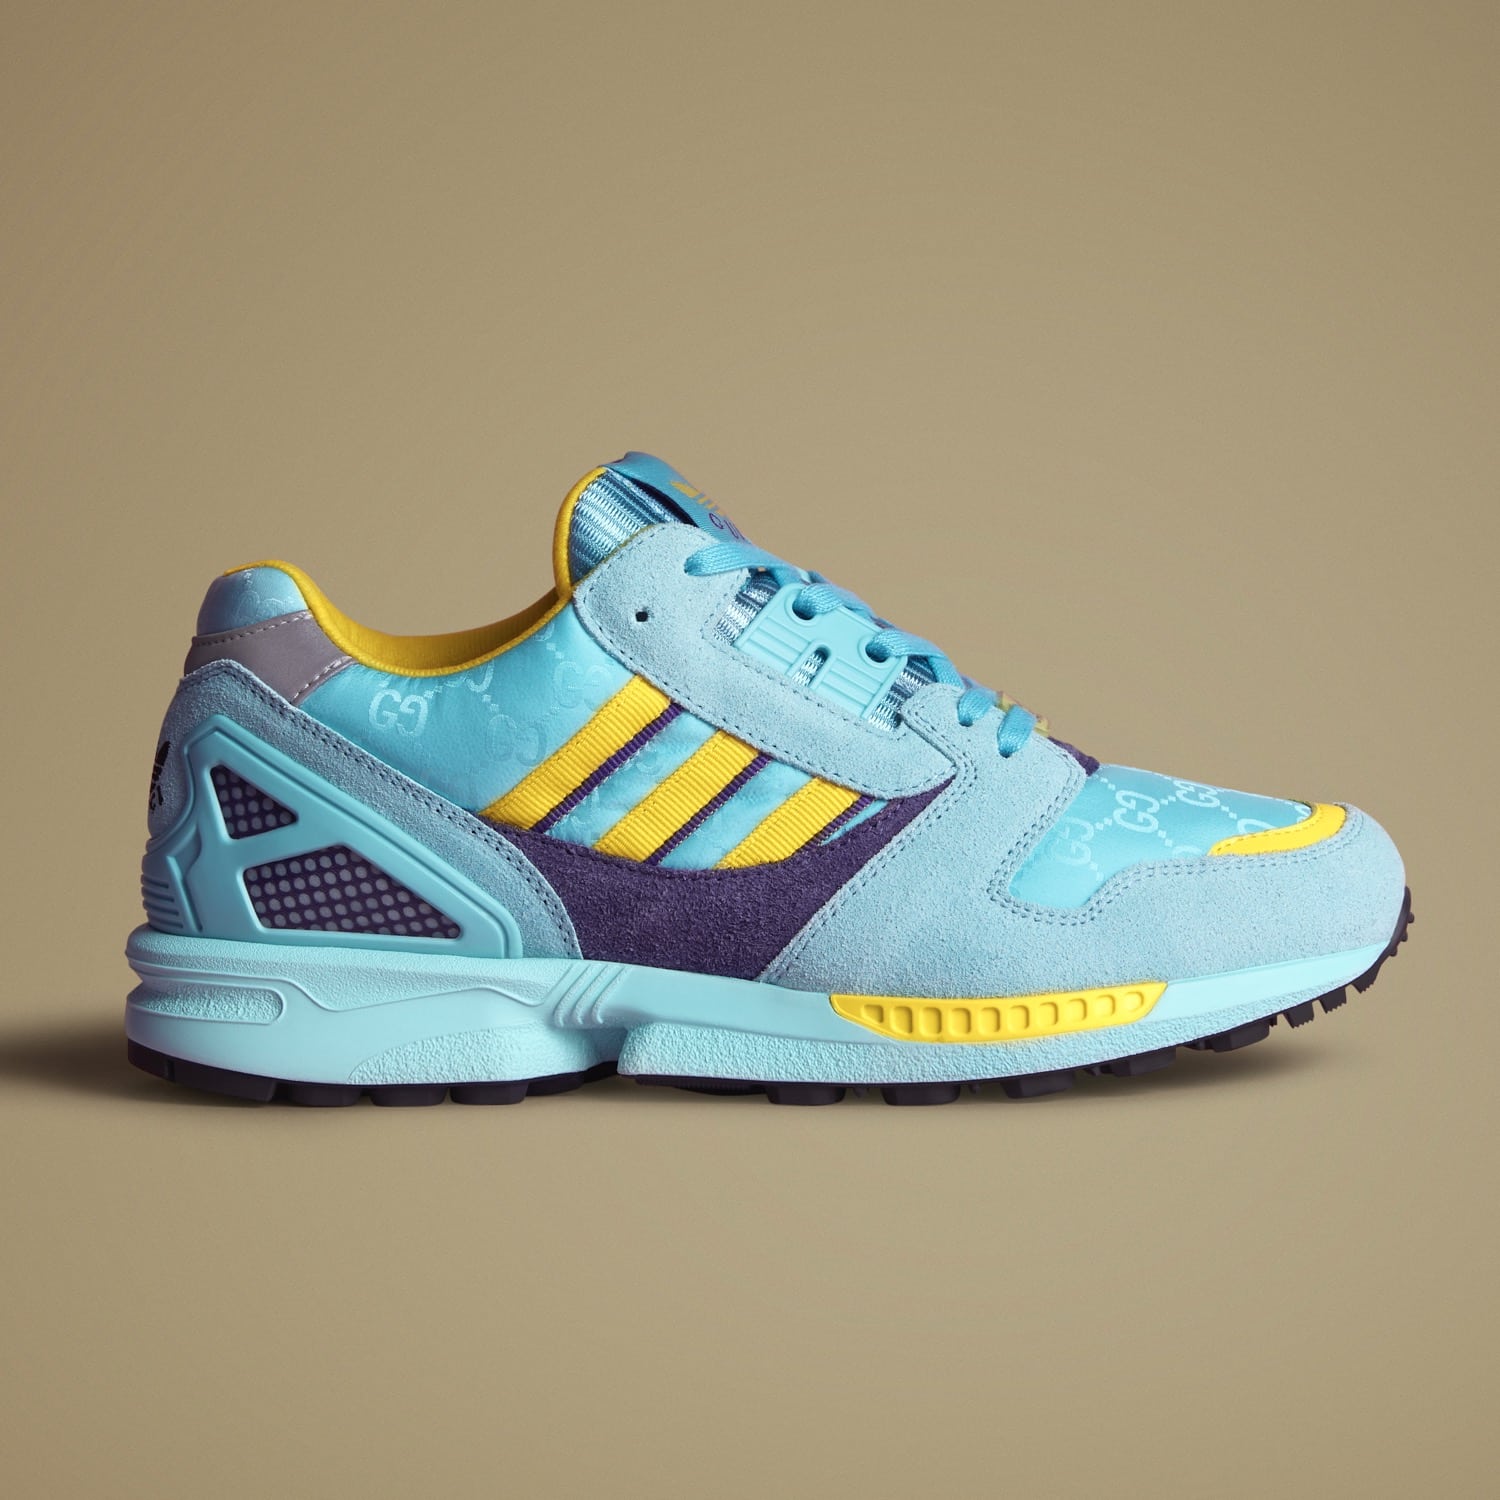 Sneakers adidas x Gucci Spring 2023 4